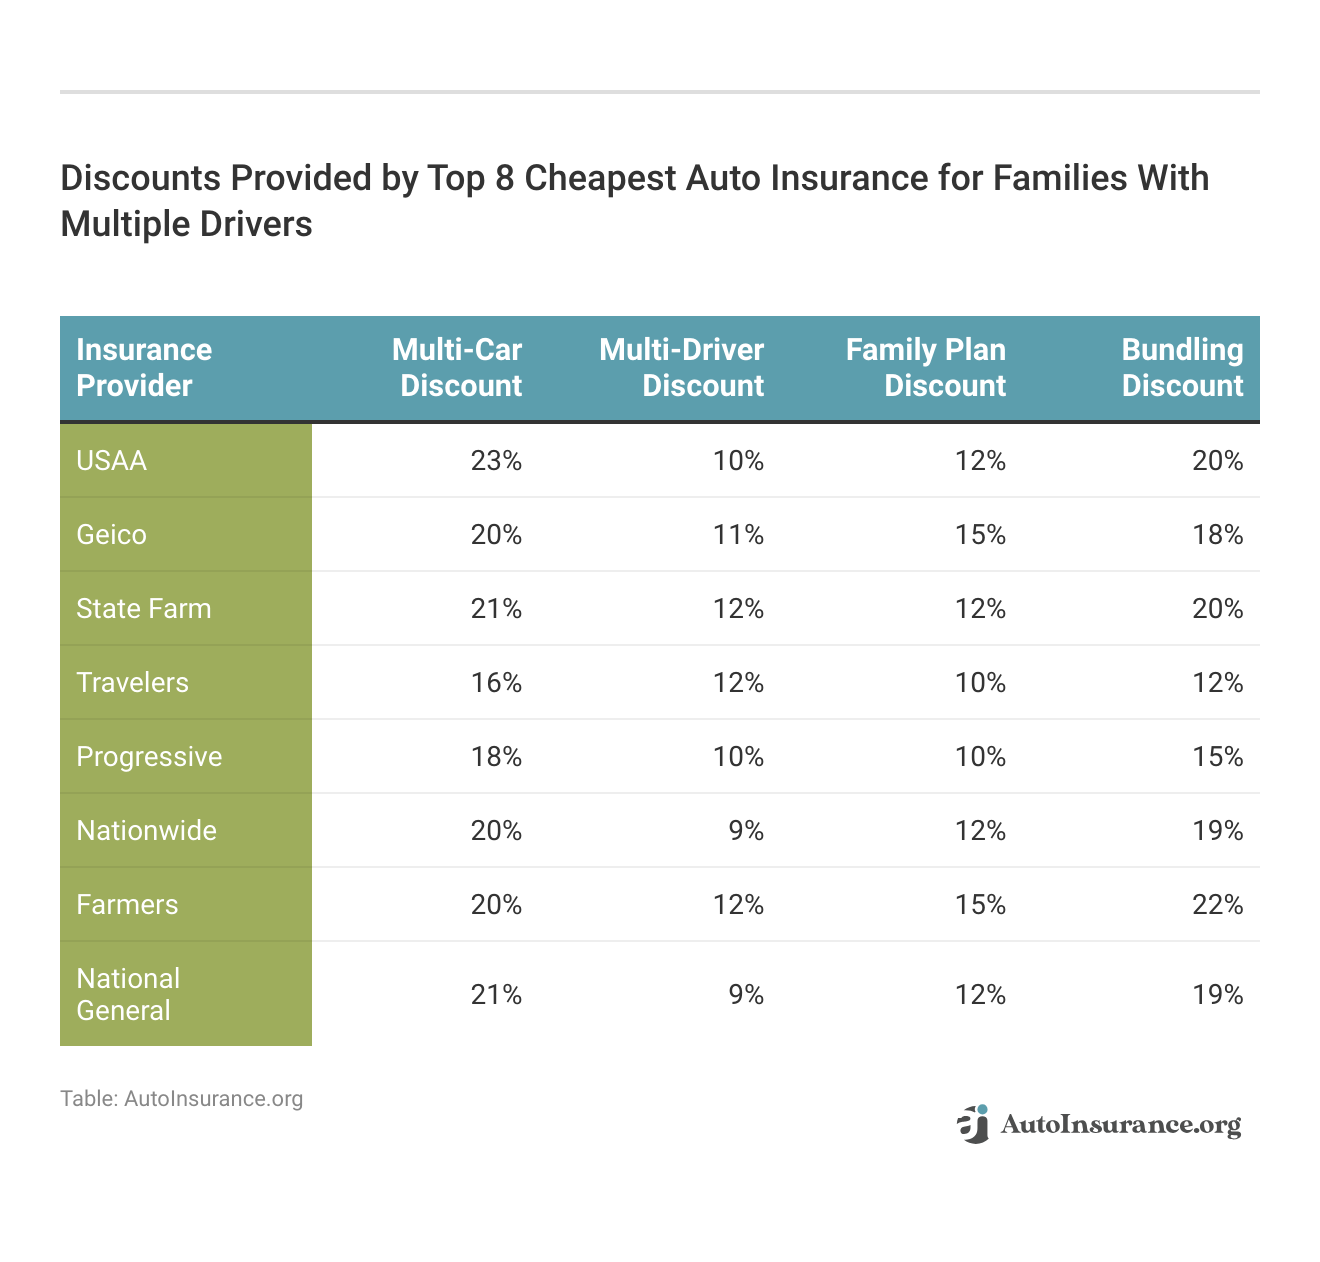 <h3>Discounts Provided by Top 8 Cheapest Auto Insurance for Families With Multiple Drivers</h3>